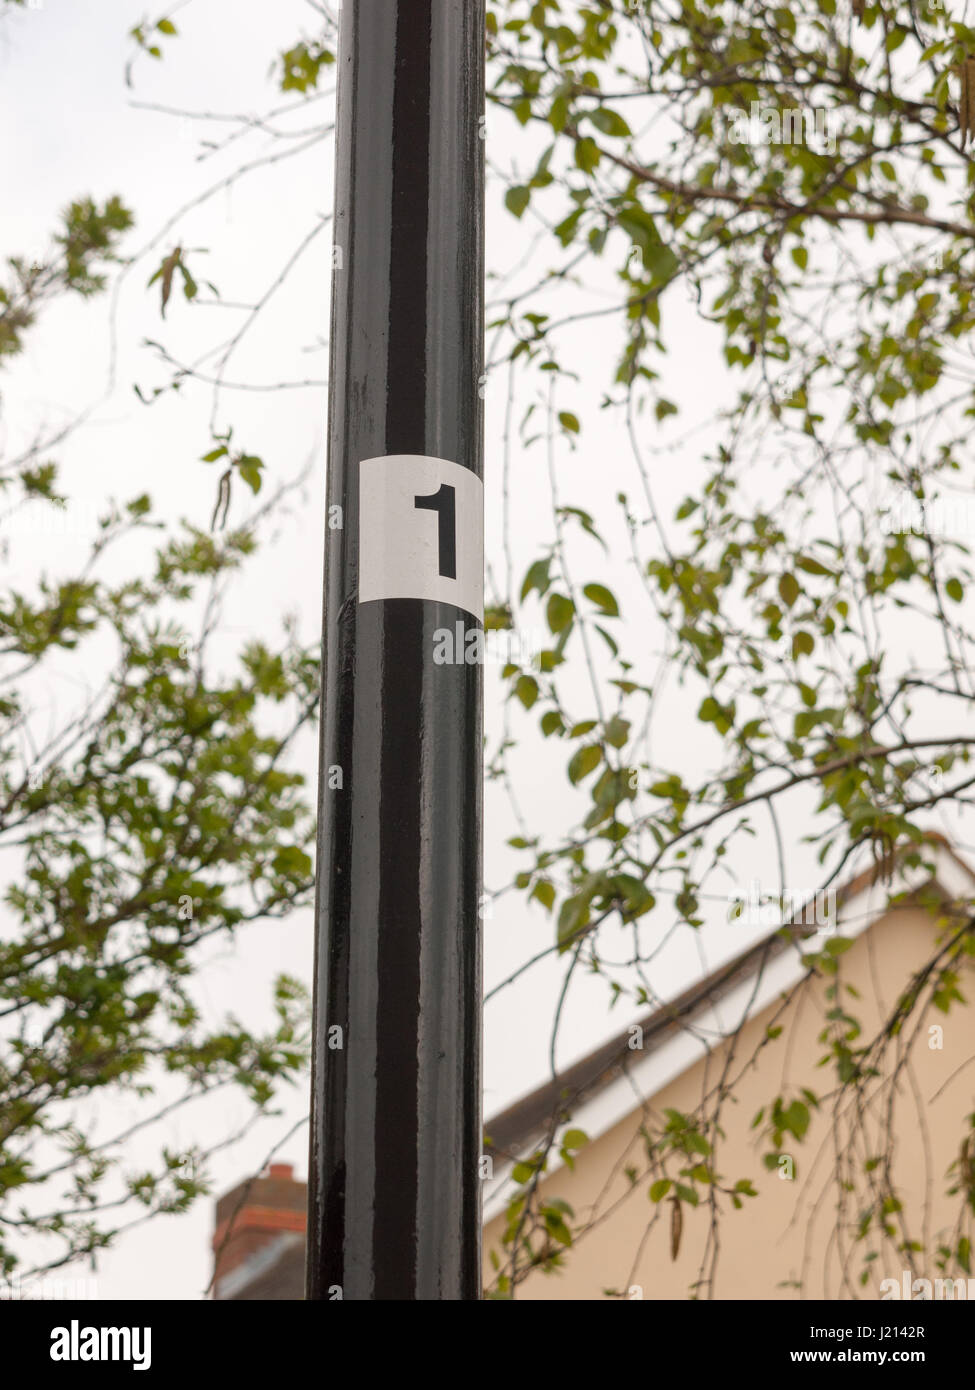 a black pole leading up with a white sticker and the number 1 on it, clear directions numbering one, stuck stamp label labeled england uk suburbs urba Stock Photo